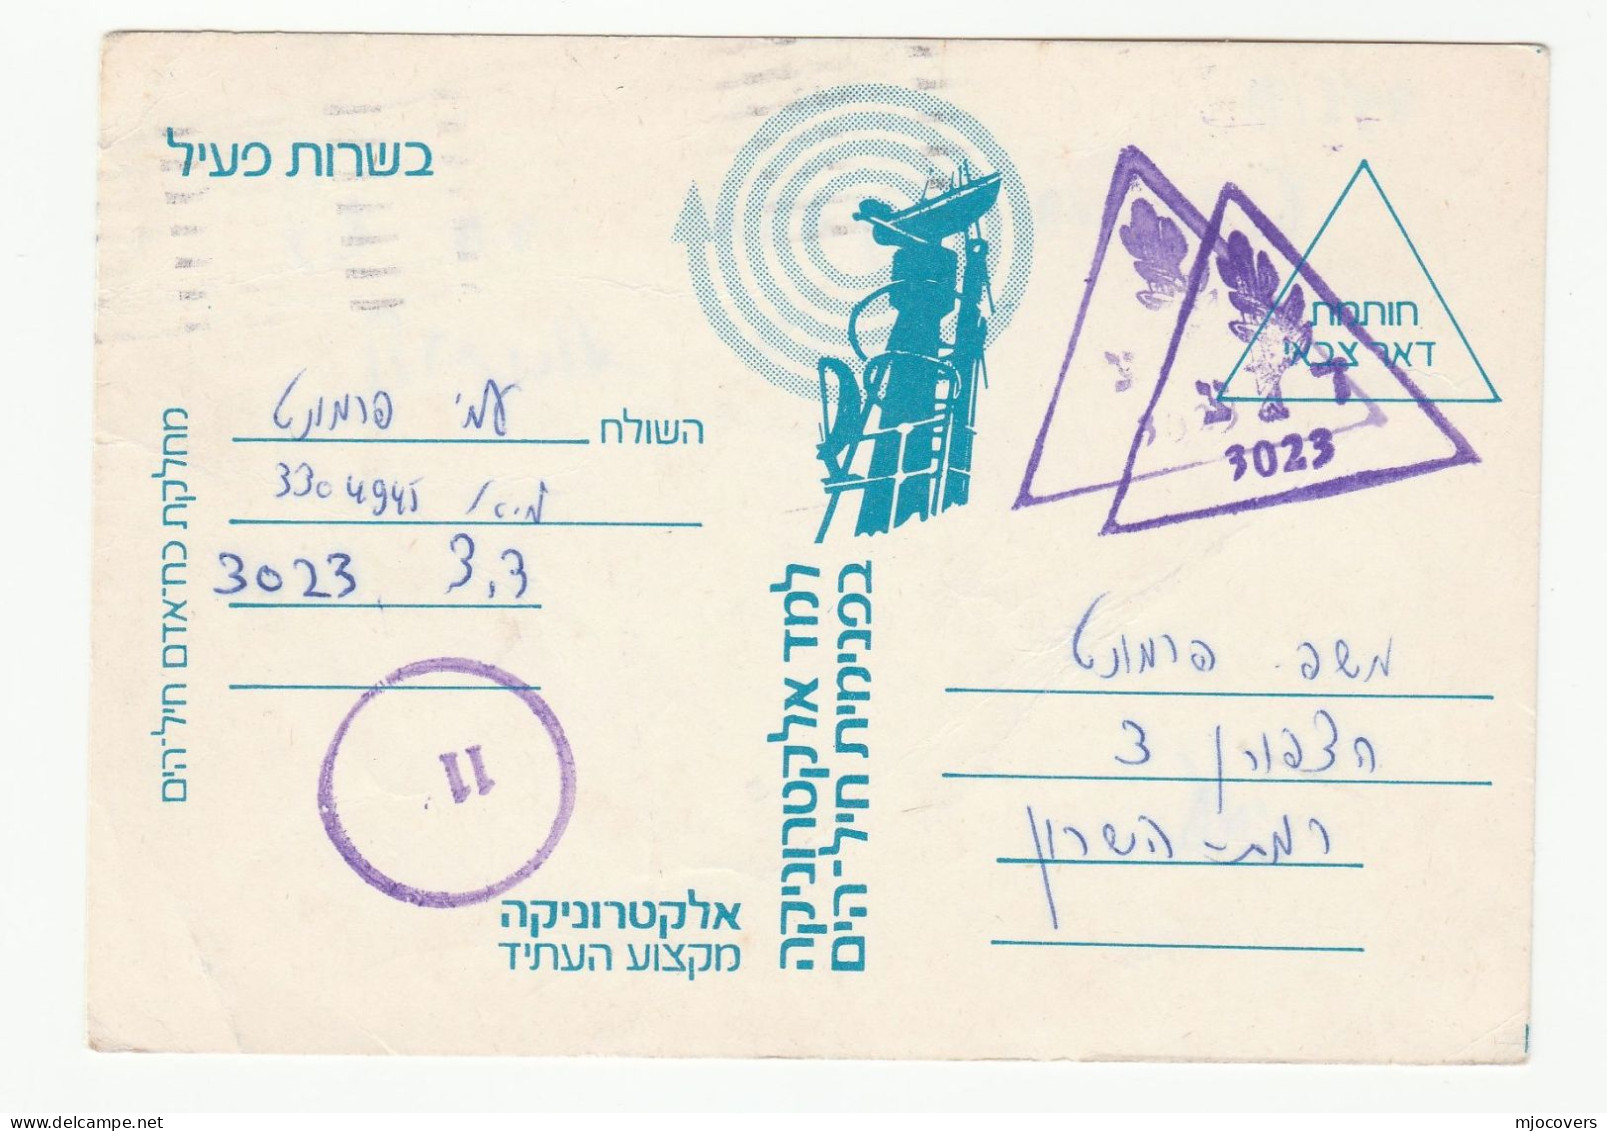 1979 Israel NAVY MILITARY SERVICE CARD  Forces Mail SHIP Cover Zahal Postcard Unit 3023 Naval Electronics School - Briefe U. Dokumente